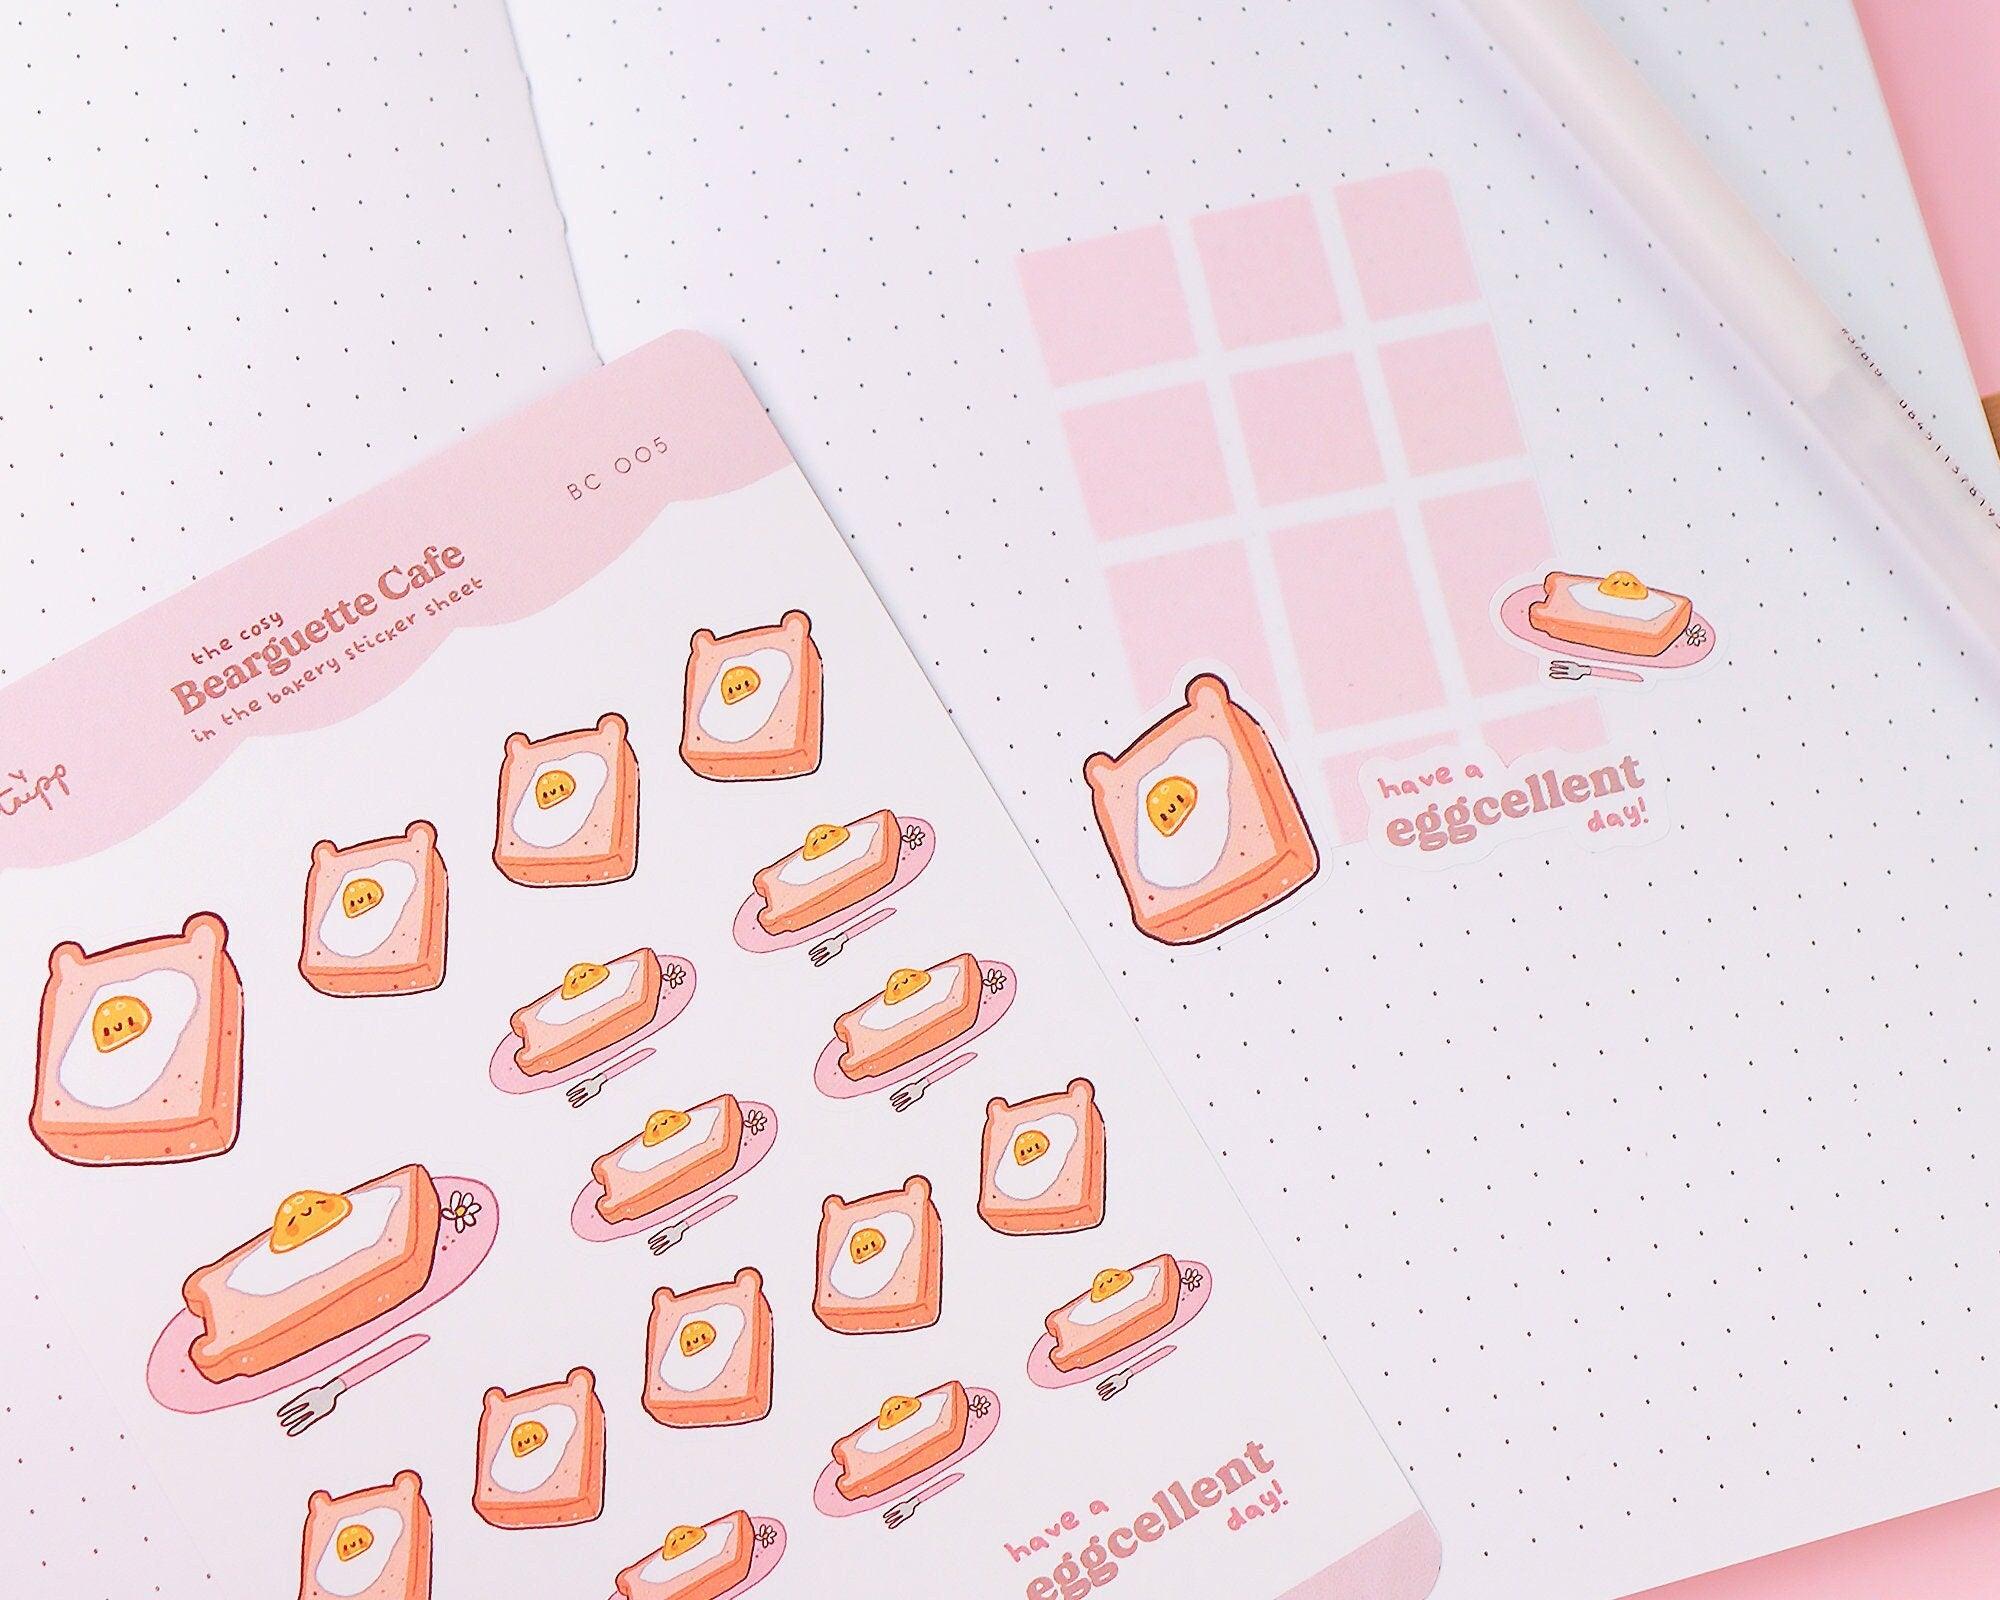 Cute Eggs on Toast ~ Cafe Bakery Polco Deco Planner Stickers ~ BC005 - Katnipp Illustrations